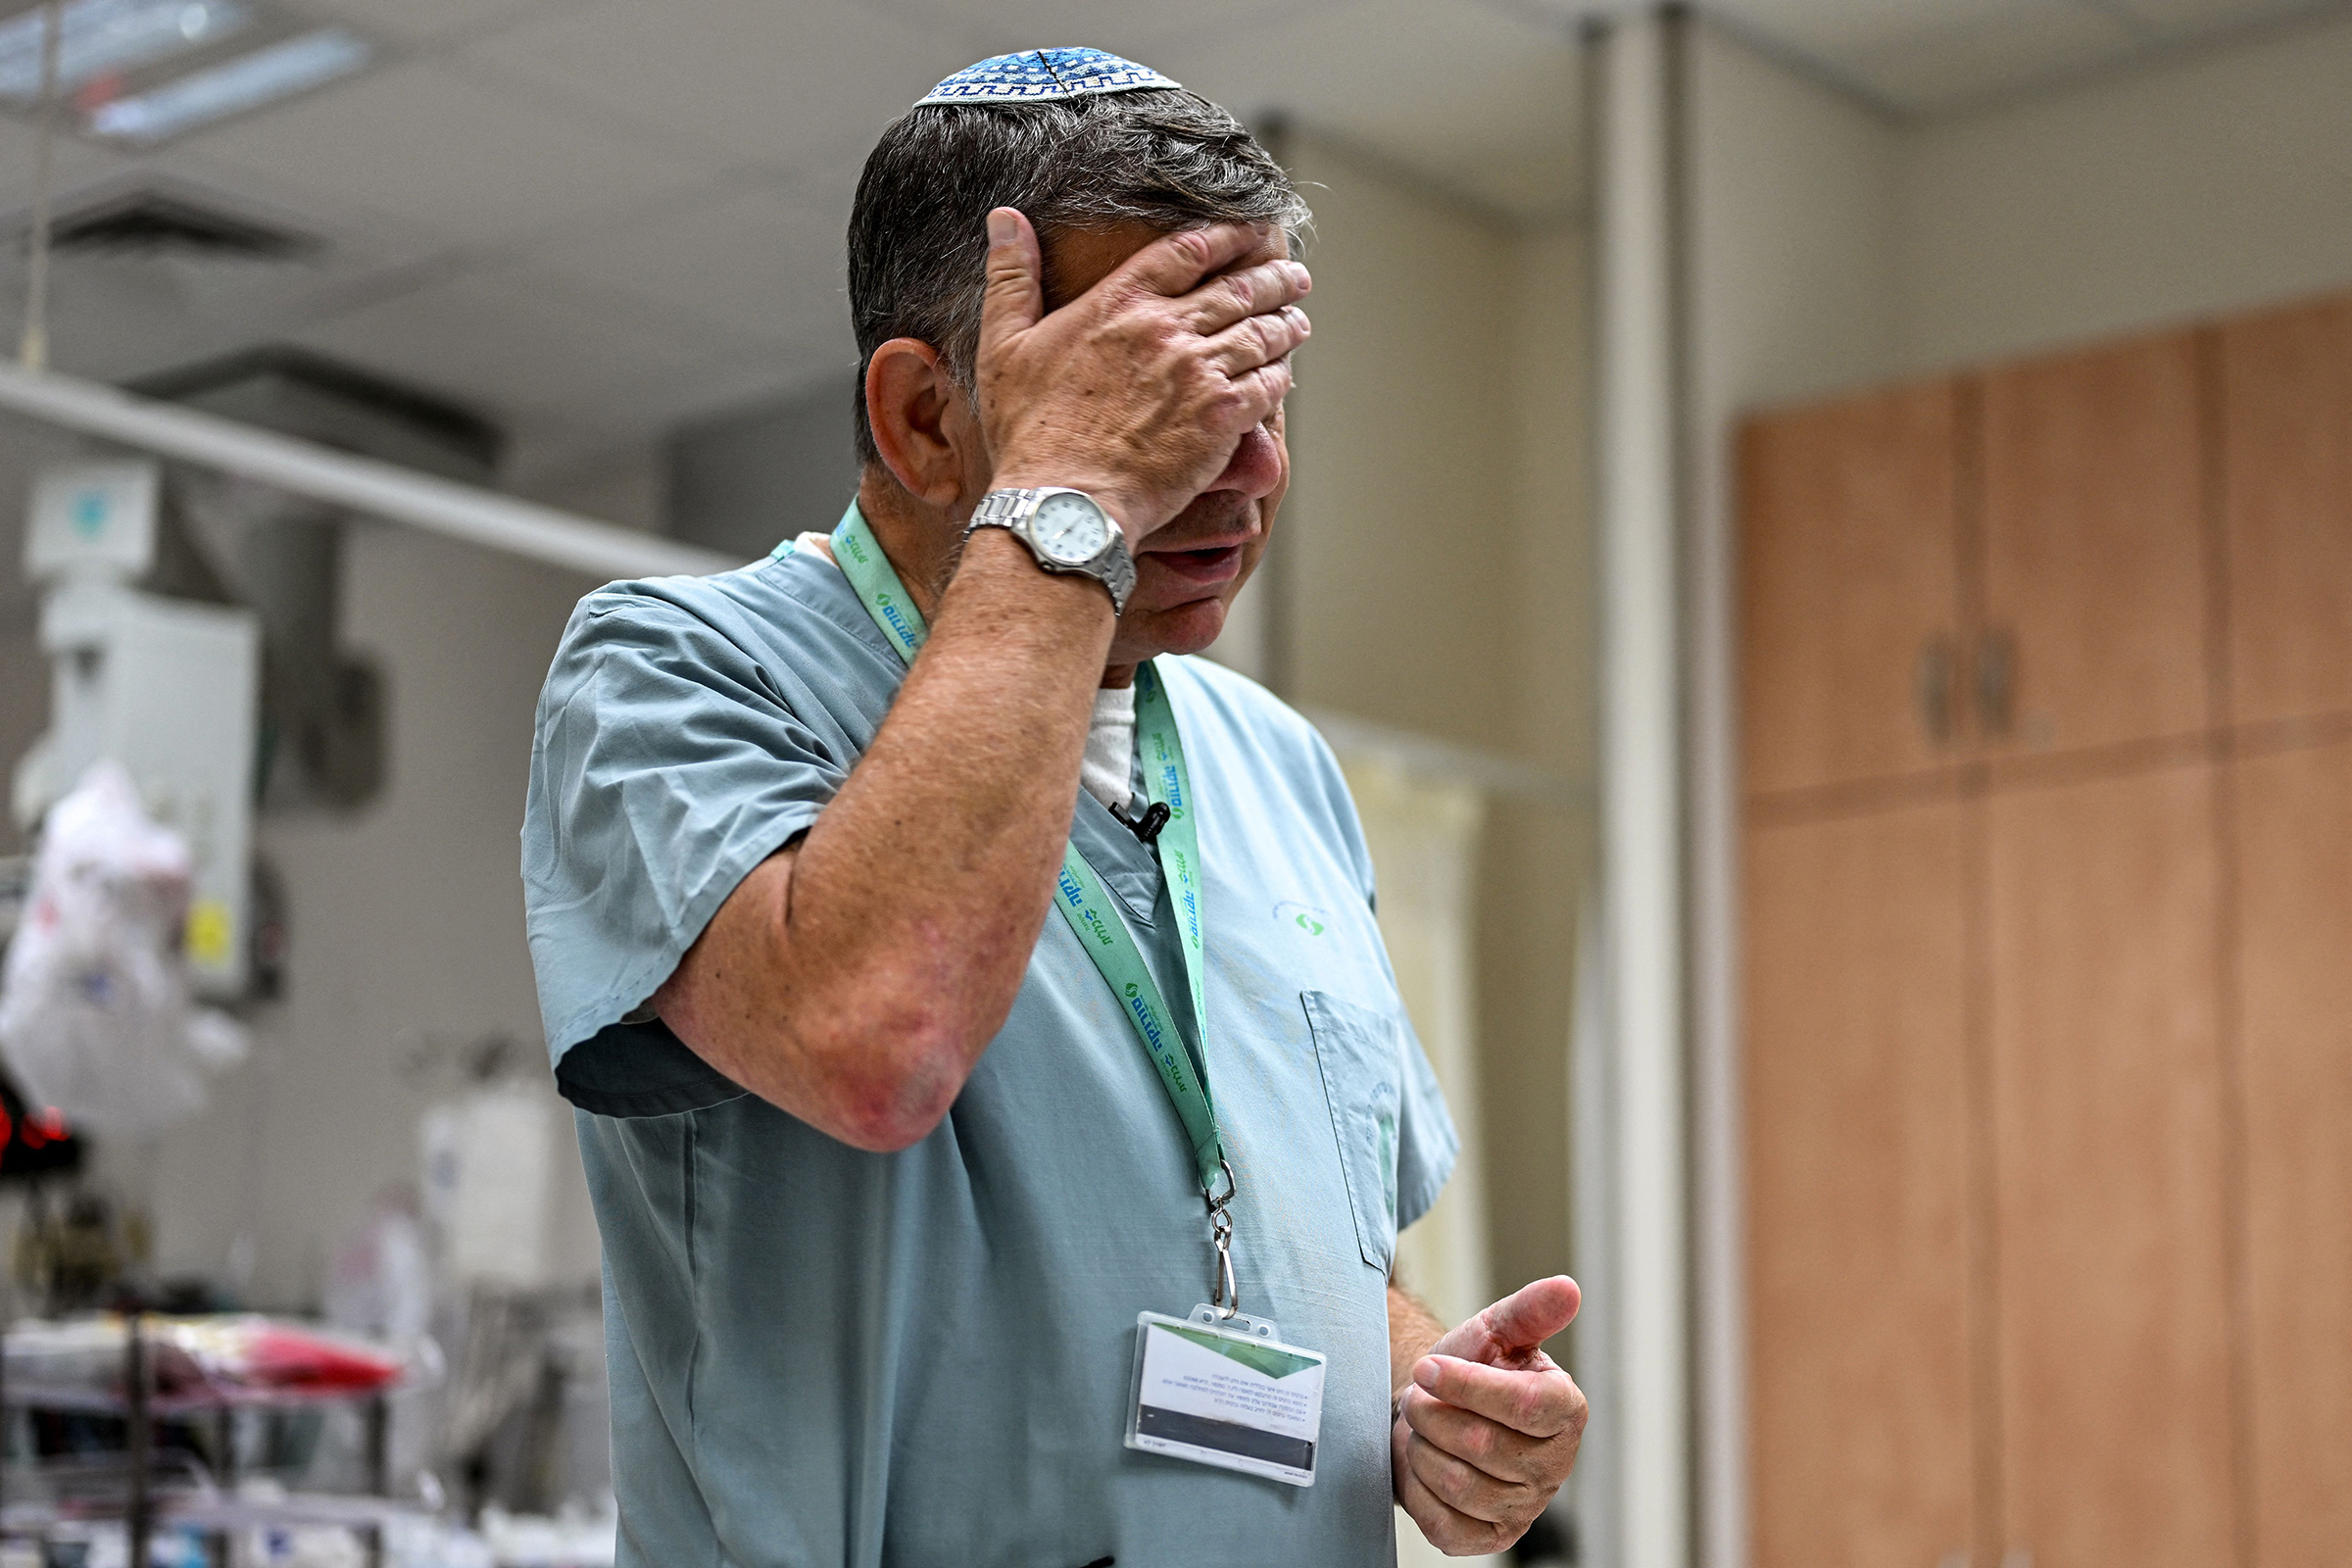 Dr. Dan Schwarzfuchs, deputy director general of Soroka Medical Center, recounts treating wounded patients in the emergency unit after Hamas militants attacked Israel on Oct. 7, in the facility in Beersheba, Israel, on Oct. 11. (Yuri Cortez—AFP/Getty Images)